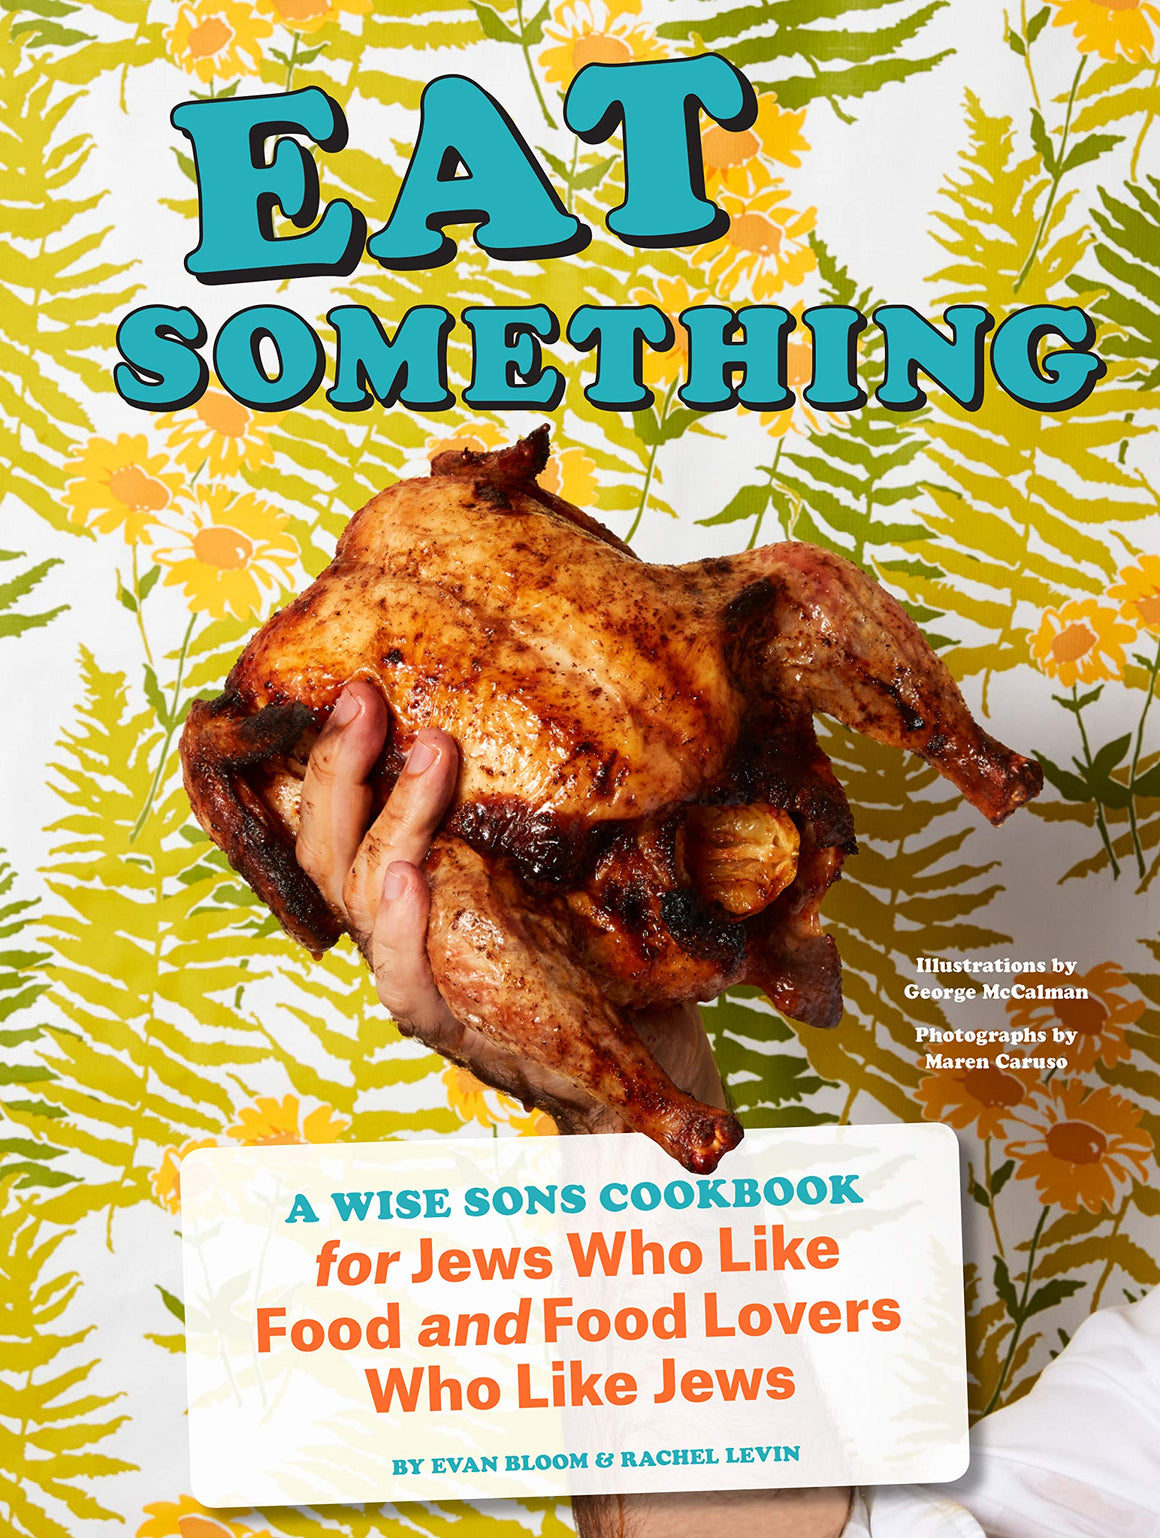 *Sale* Eat Something: A Wise Sons Cookbook for Jews Who Like Food and Food Lovers Who Like Jews *Signed* (Evan Bloom, Rachel Levin)